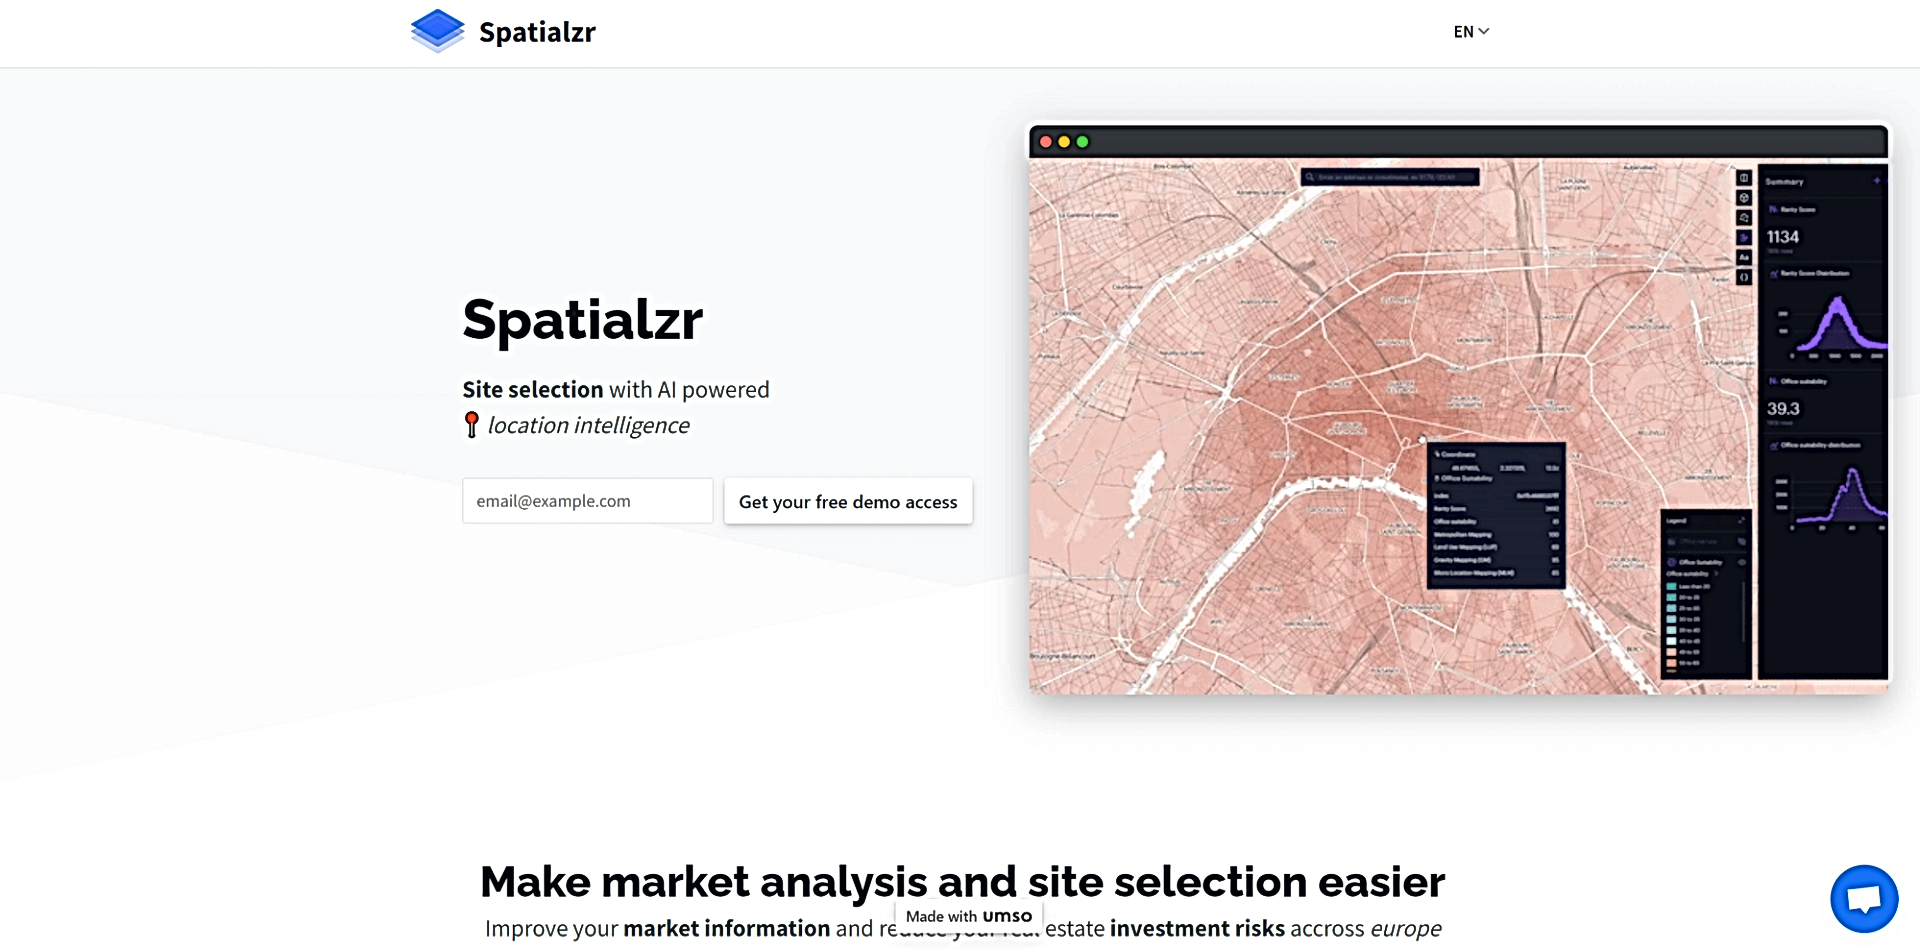 Spatialzr featured